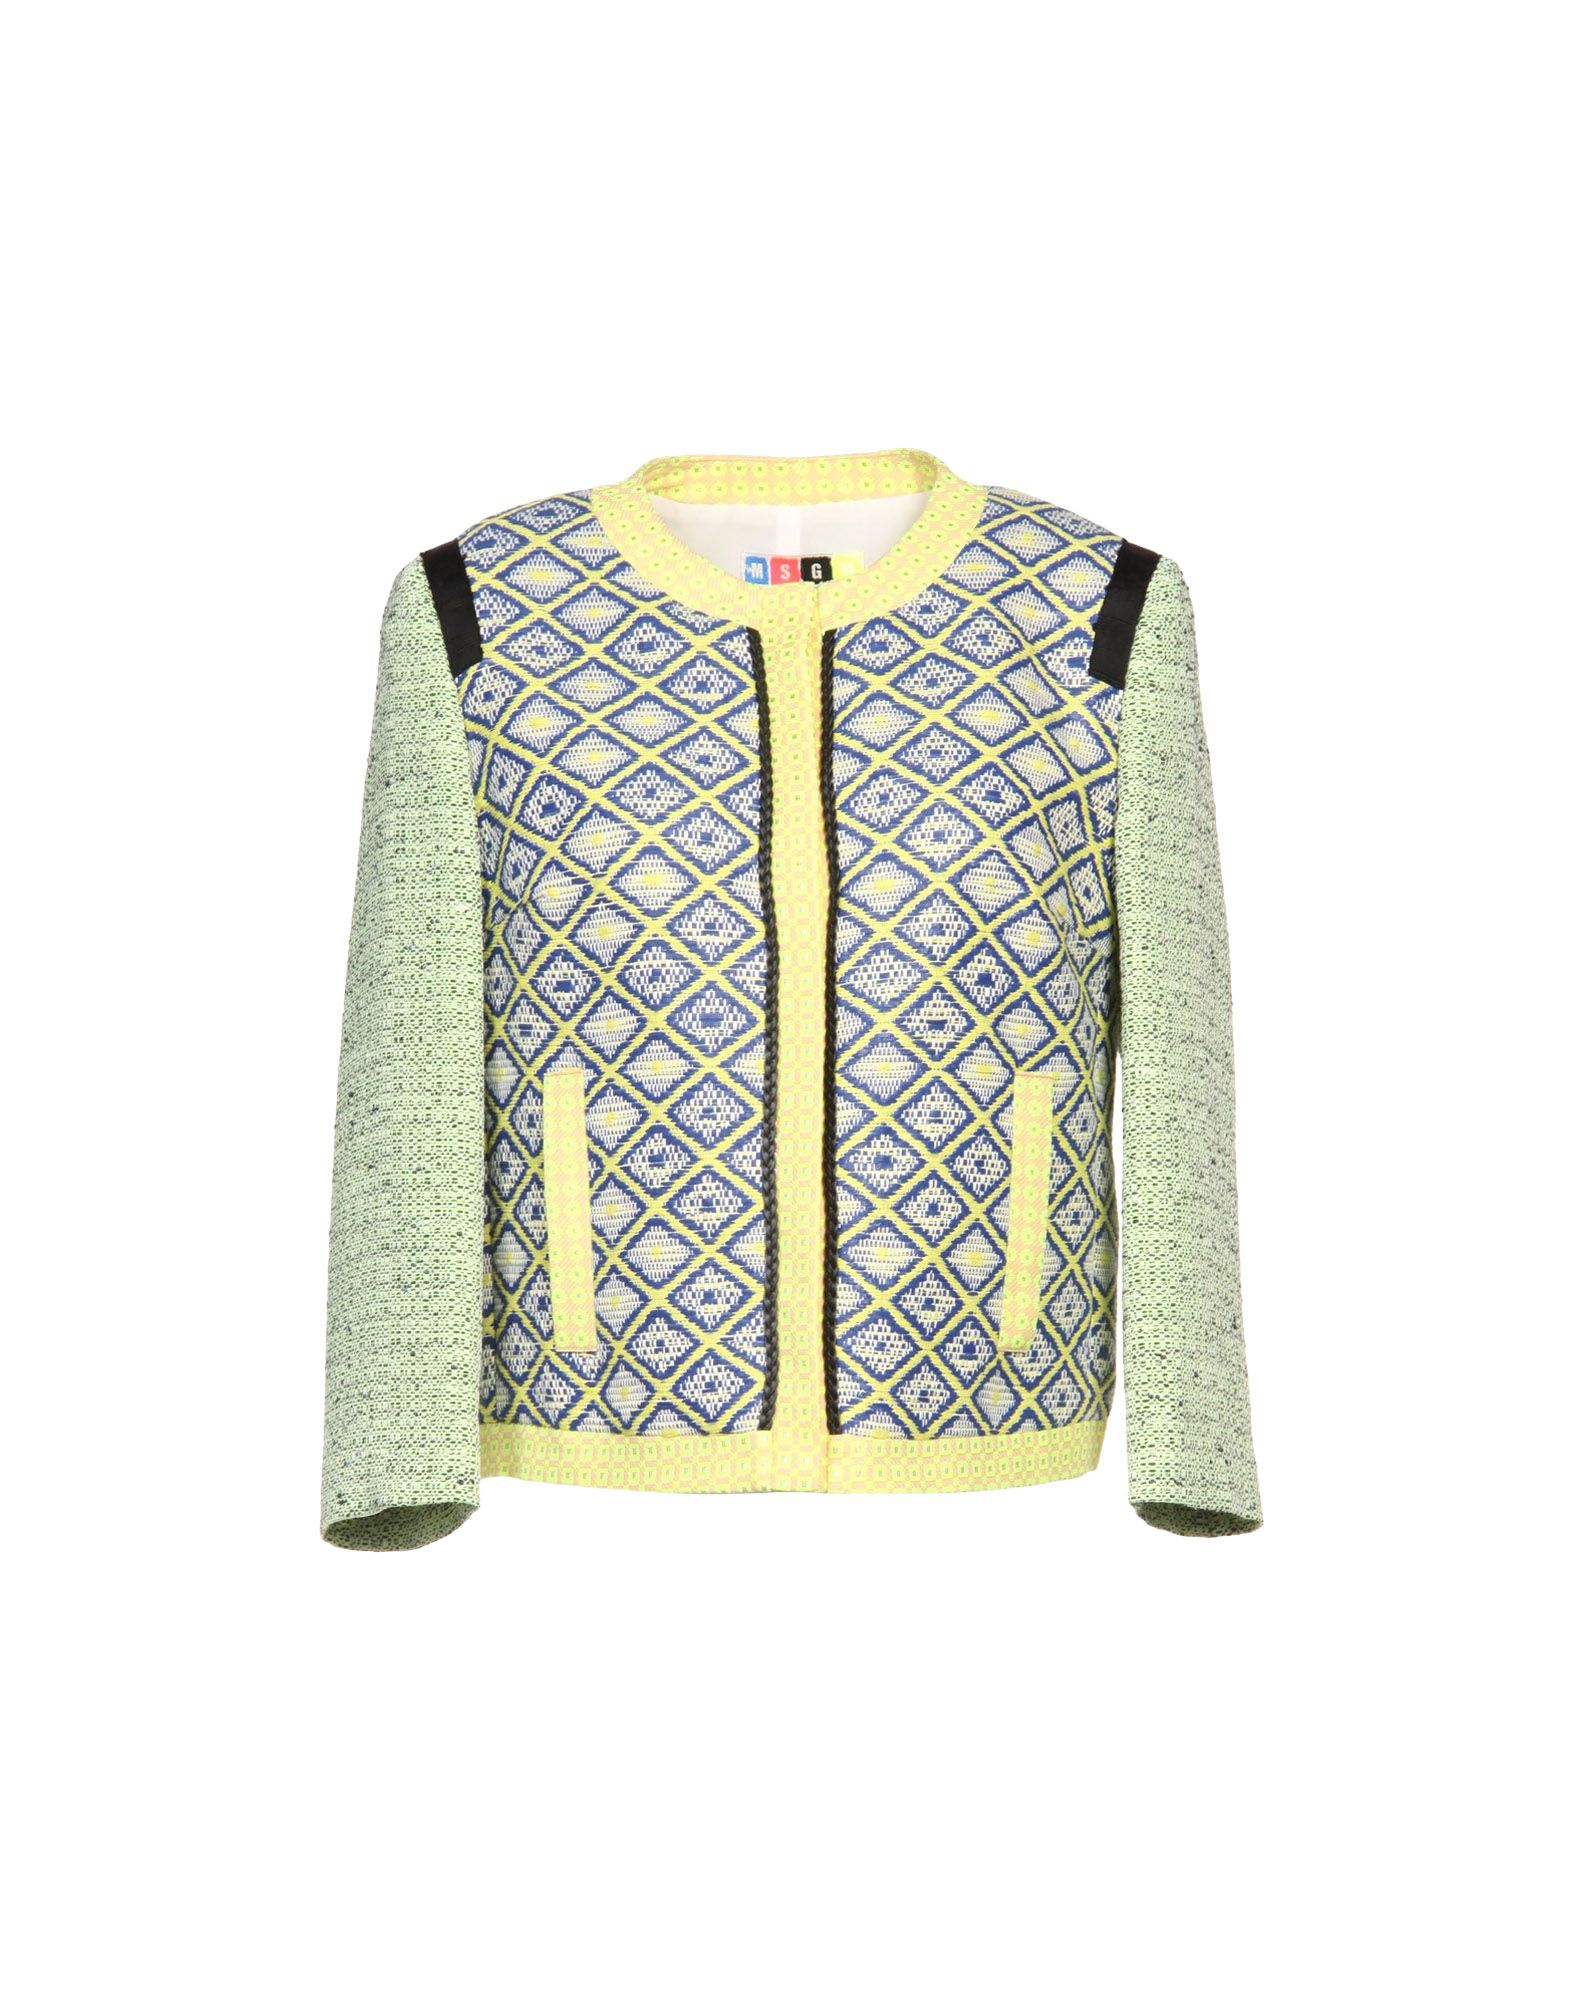 Lyst - Msgm Cropped Jacket in Yellow